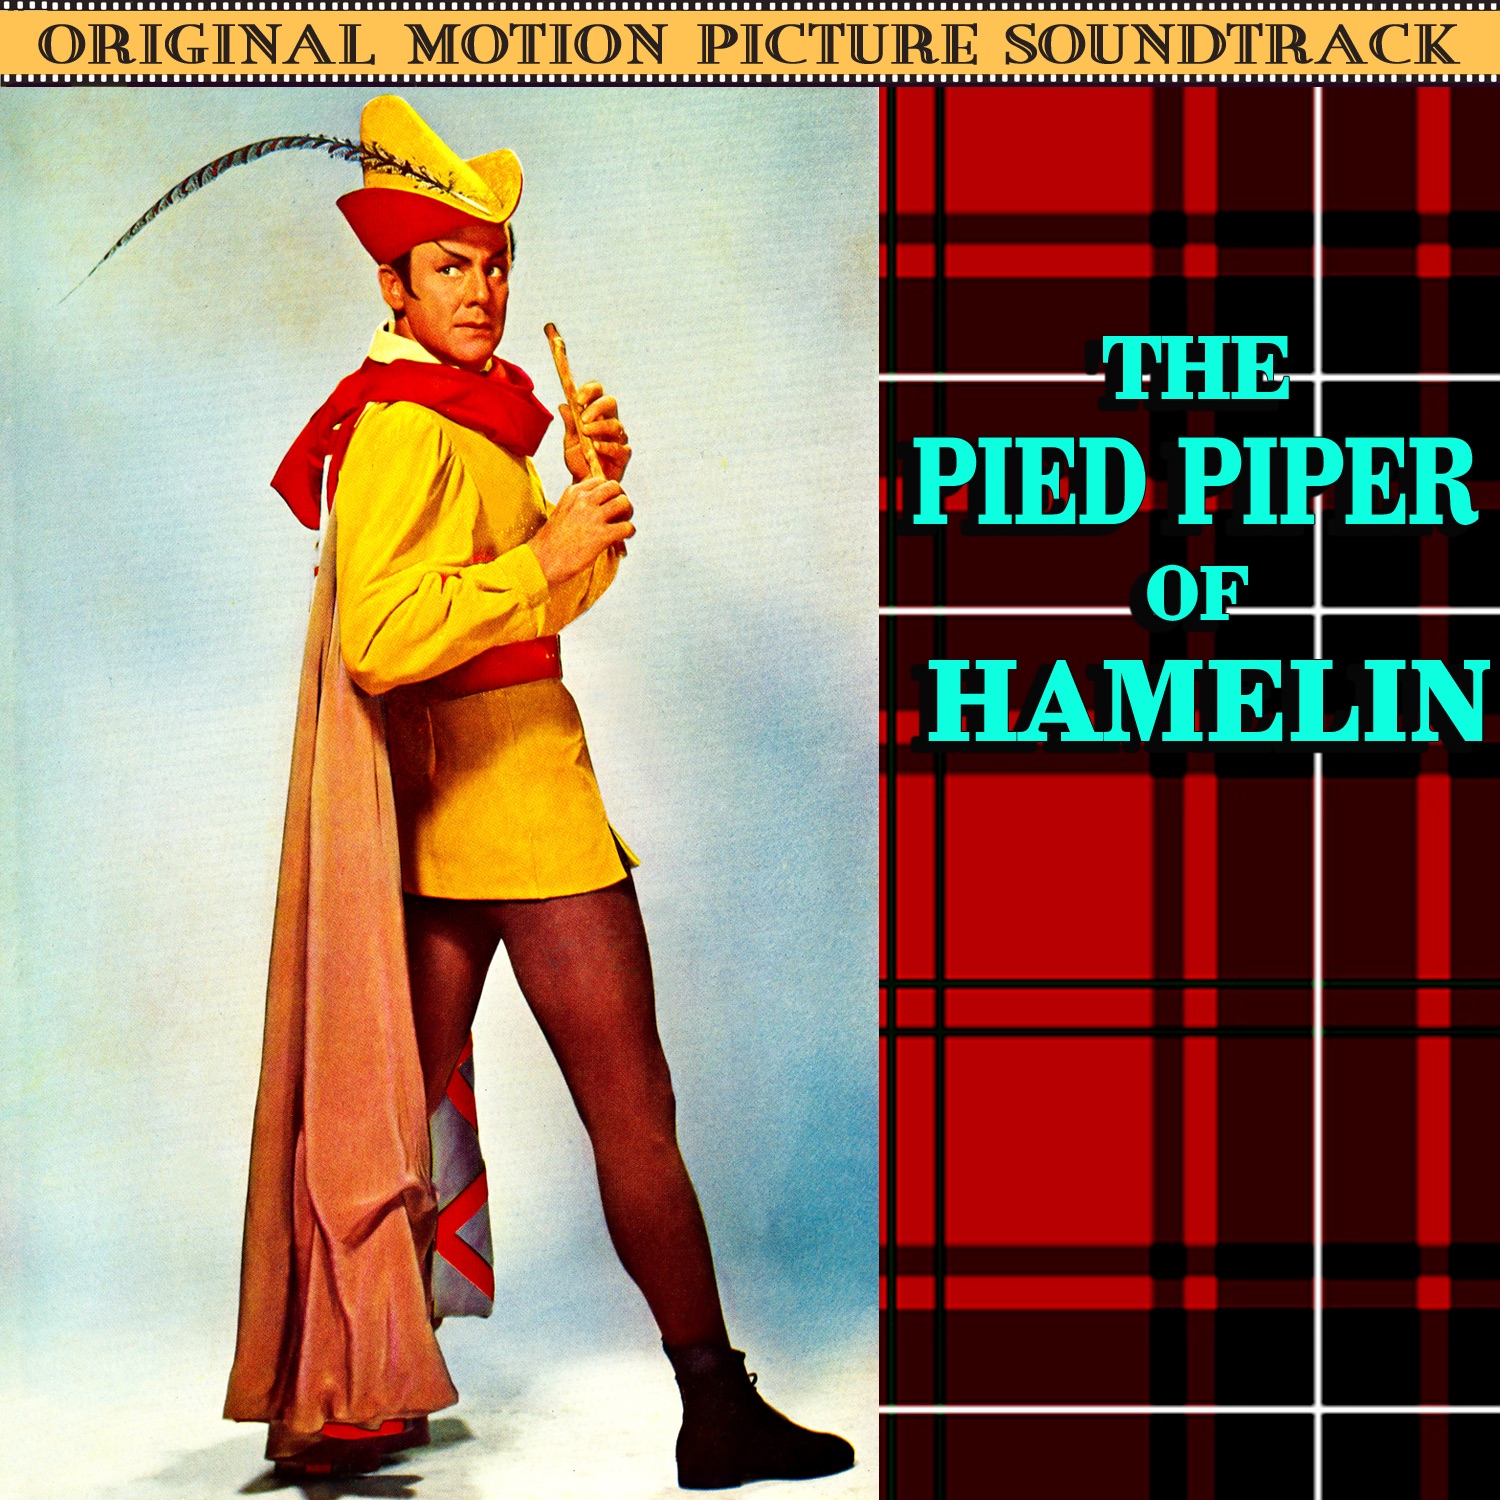 The Pied Piper Of Hamelin [1957 TV Movie]